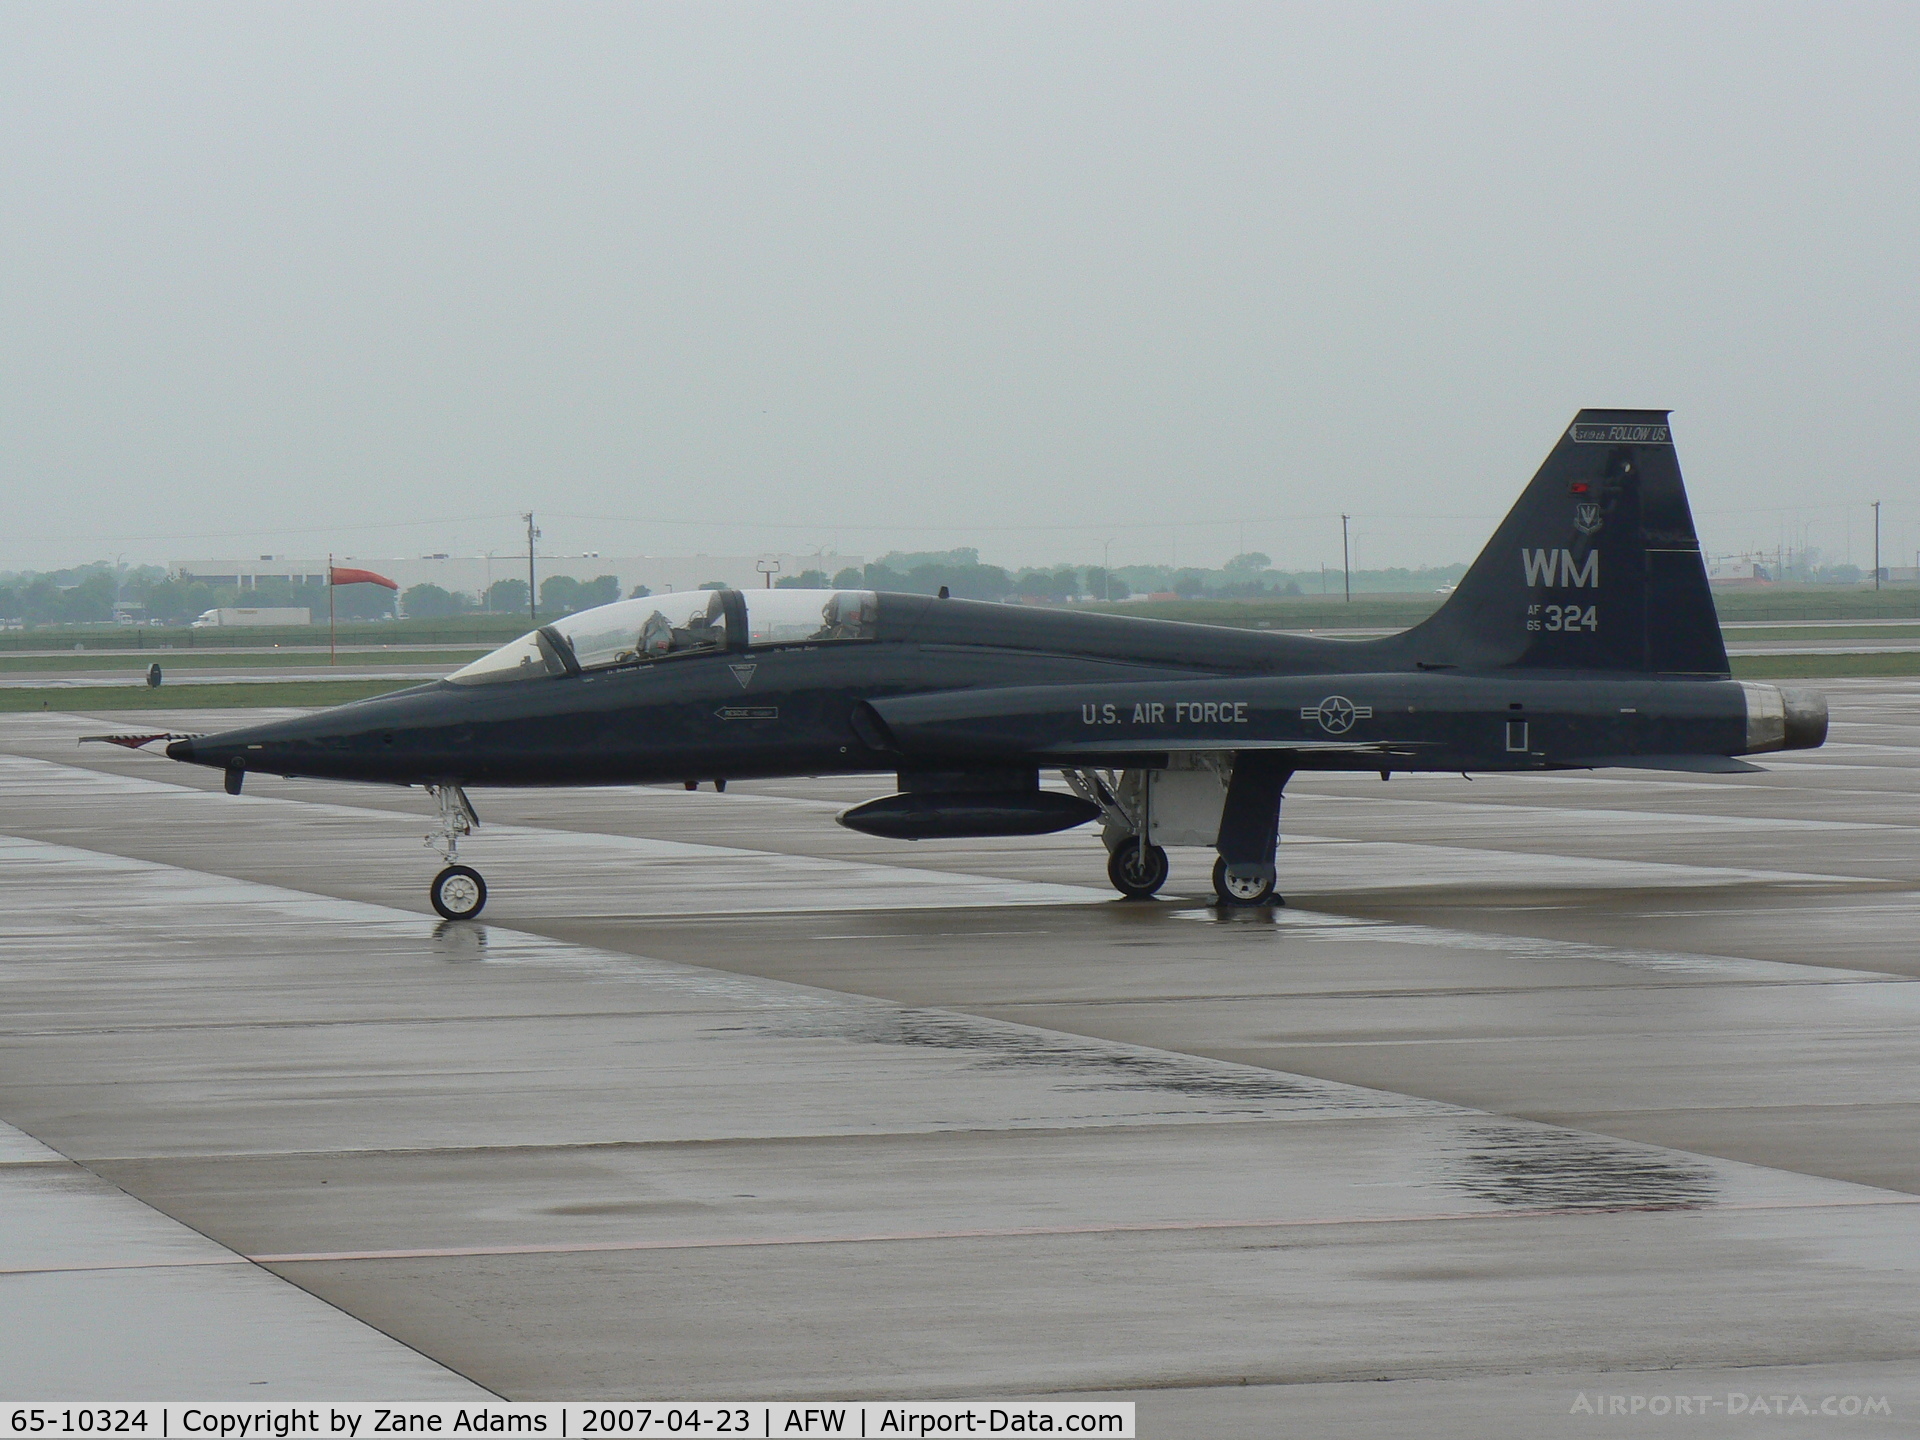 65-10324, 1965 Northrop T-38A-60-NO C/N N.5743, 509th BW, 394th CTS, Whiteman AFB, on the ramp at Alliance Ft. Worth, TX